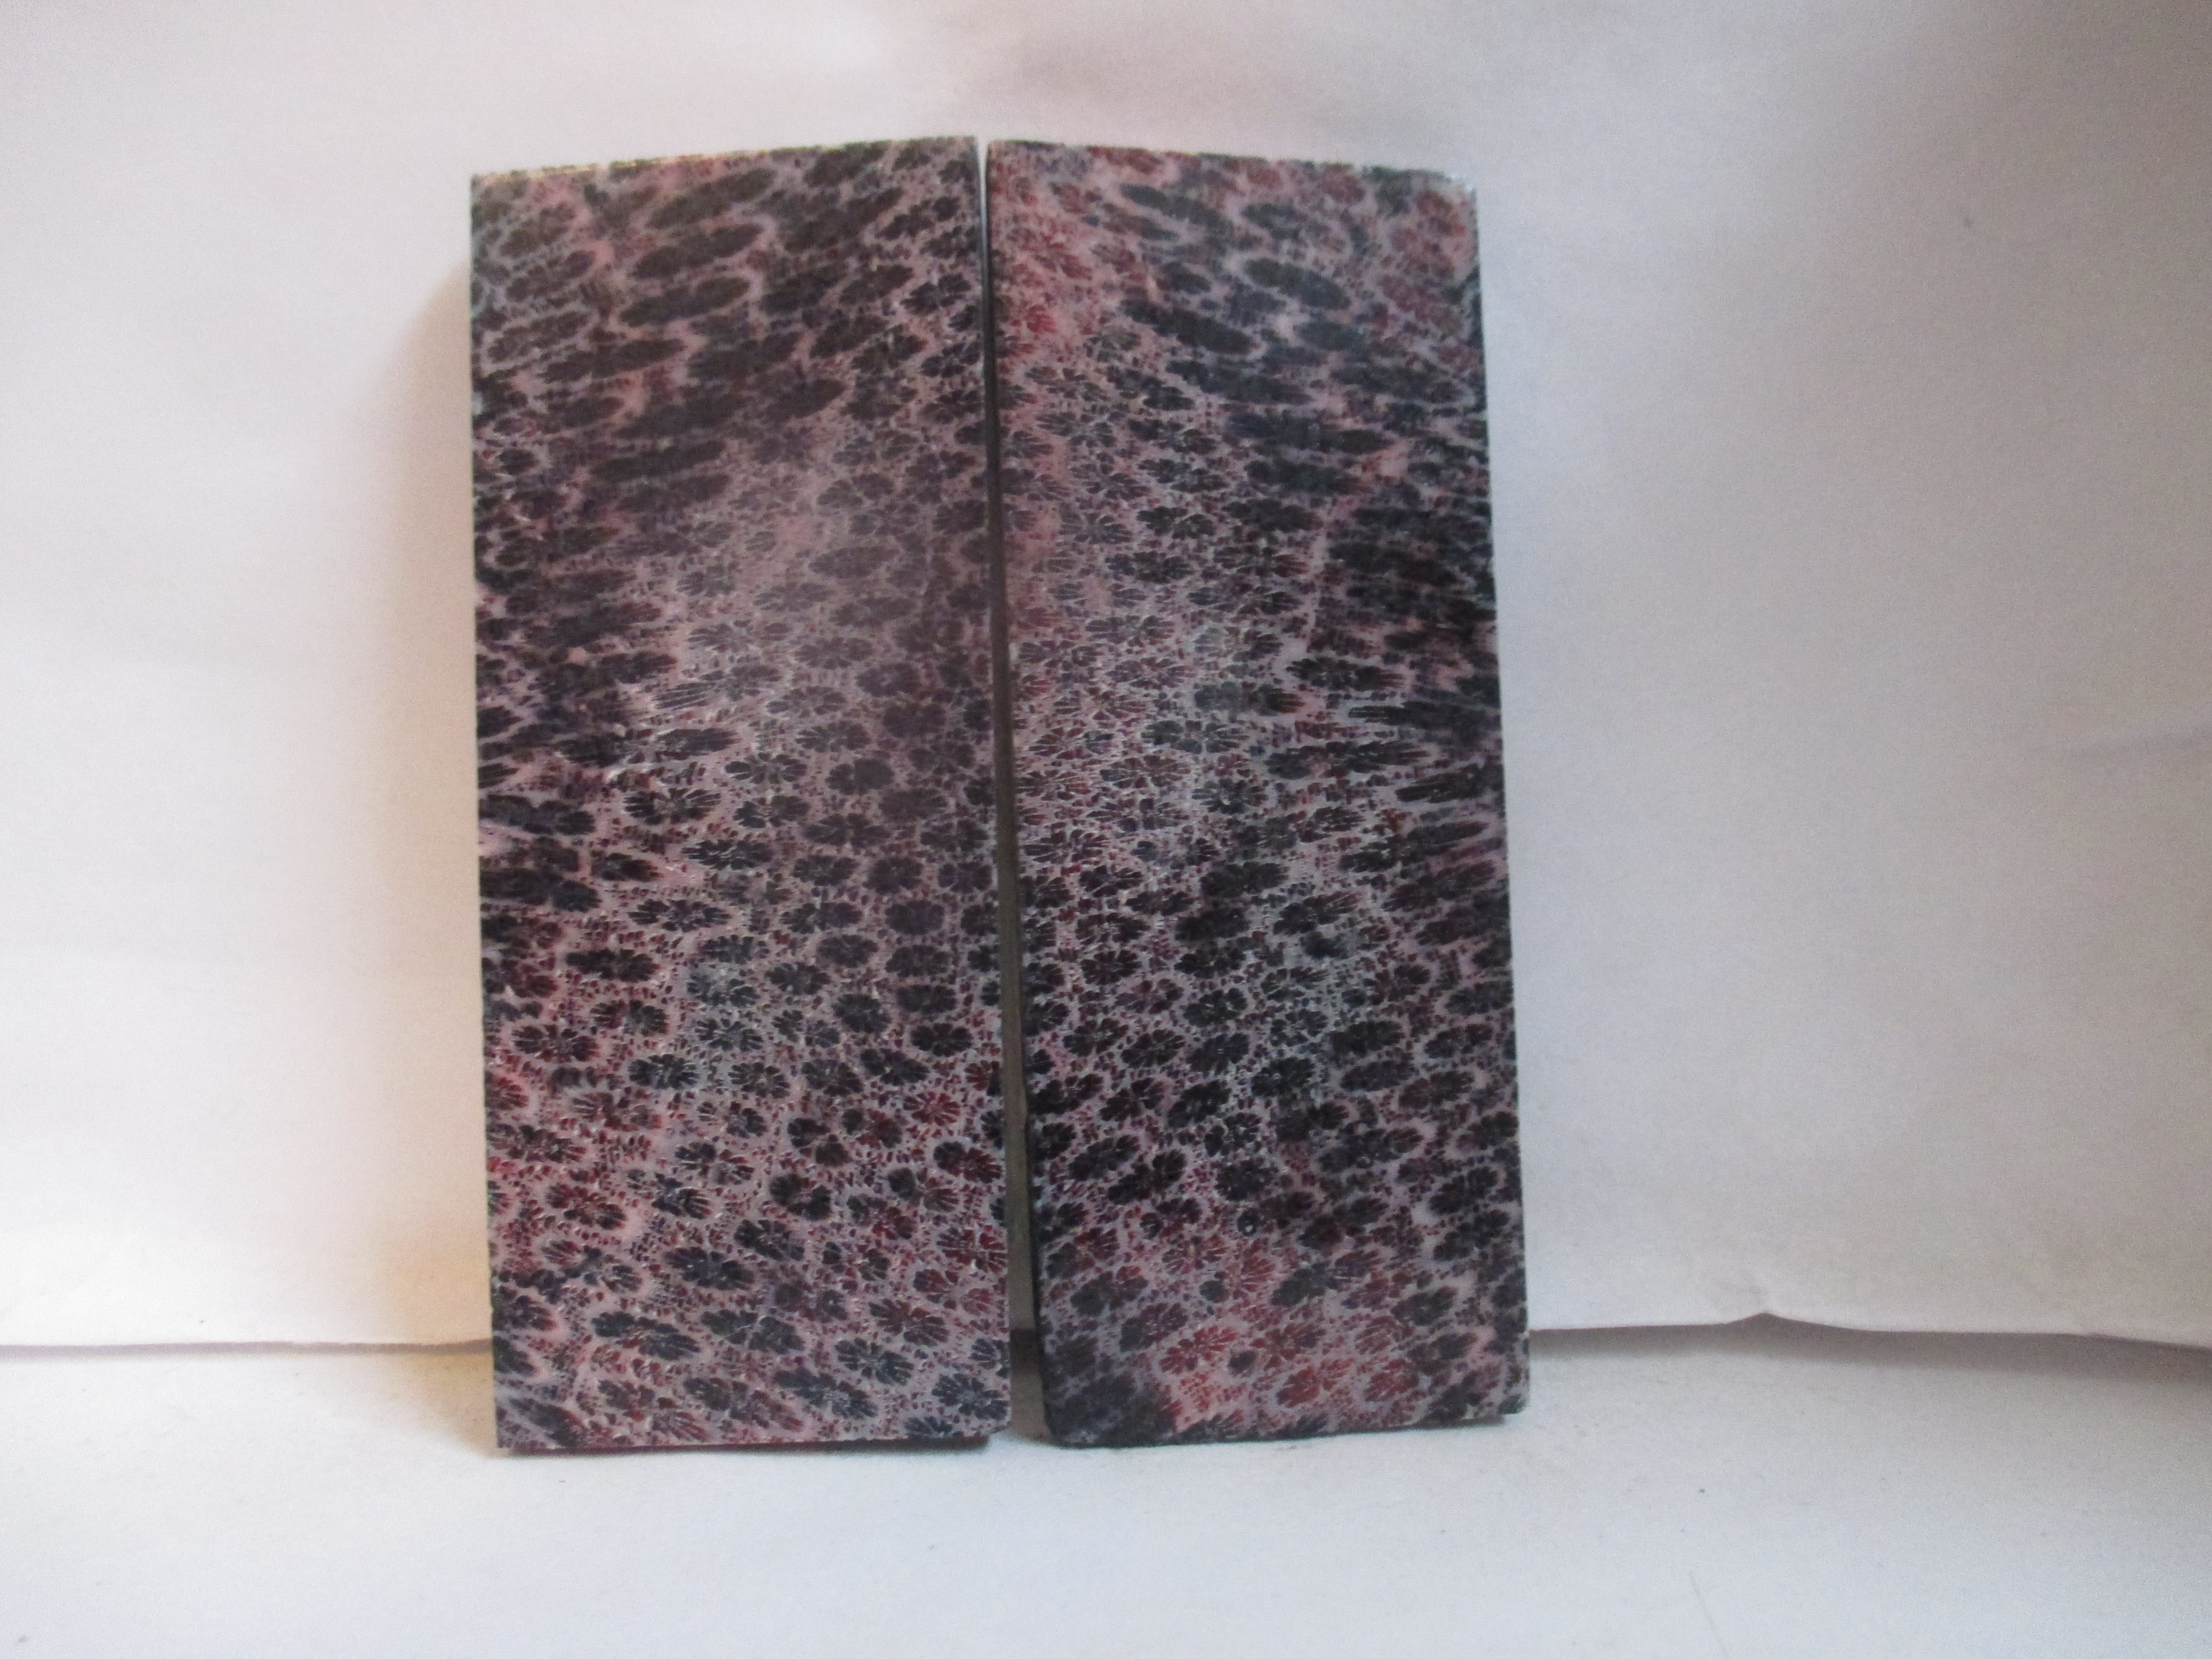 FOSSIL CORAL SCALES              3-7/16 X 1-3/8 X 1/8